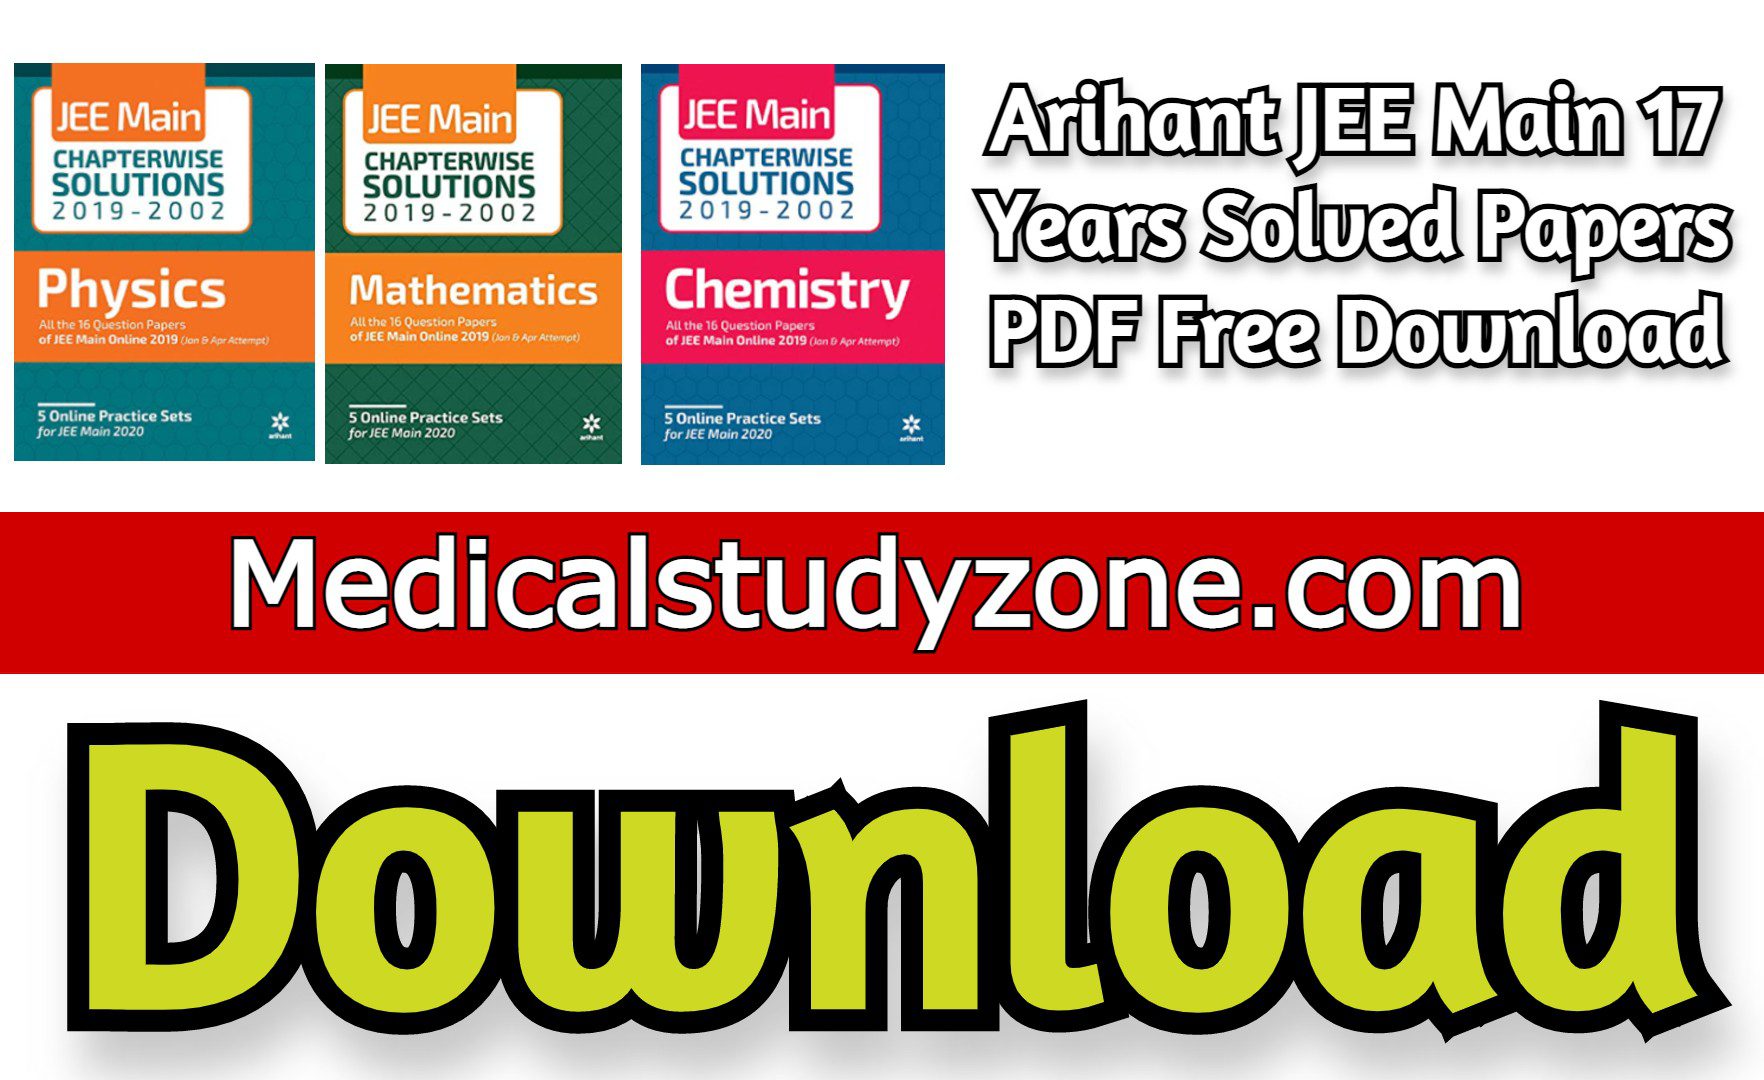 Arihant JEE Main 17 Years Solved Papers 2021 PDF Free Download